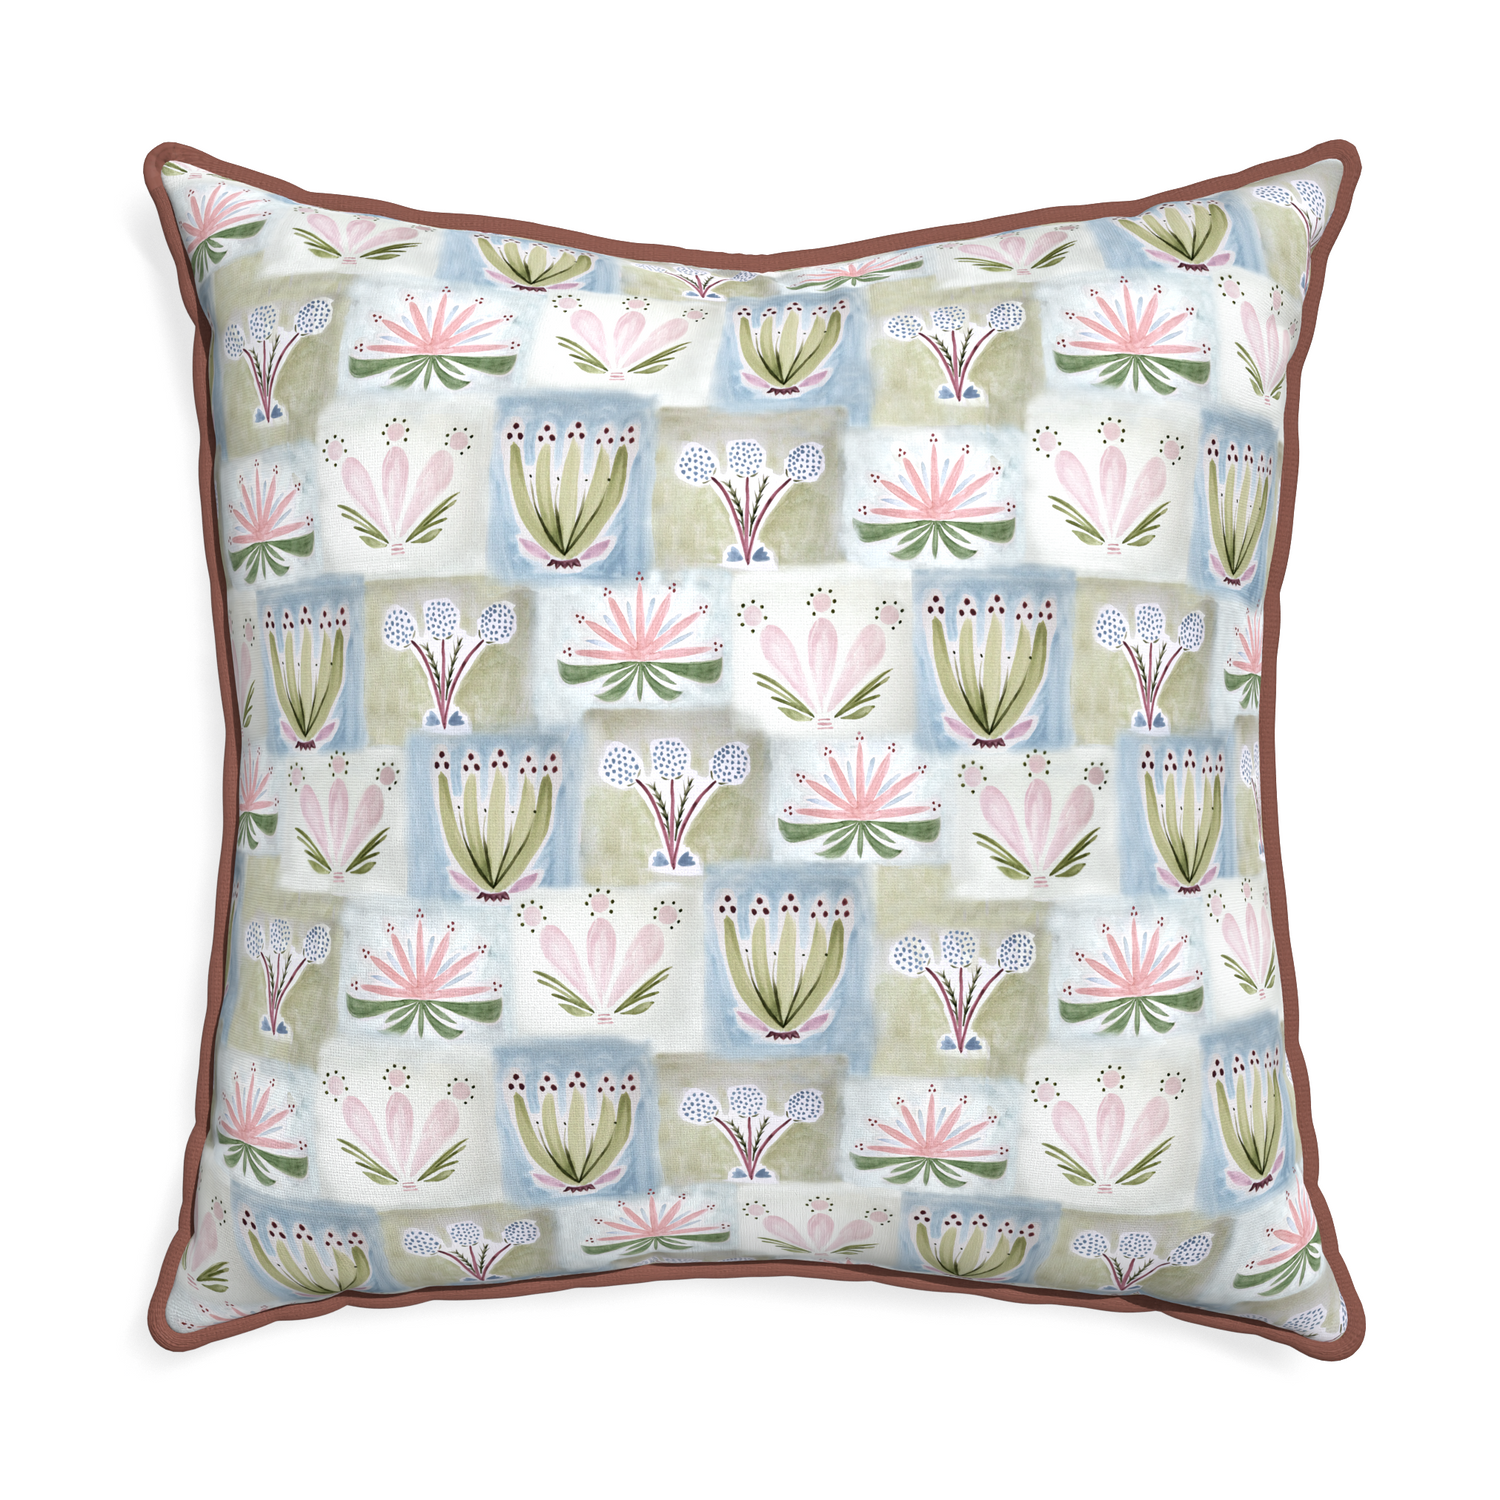 Euro-sham harper custom hand-painted floralpillow with w piping on white background